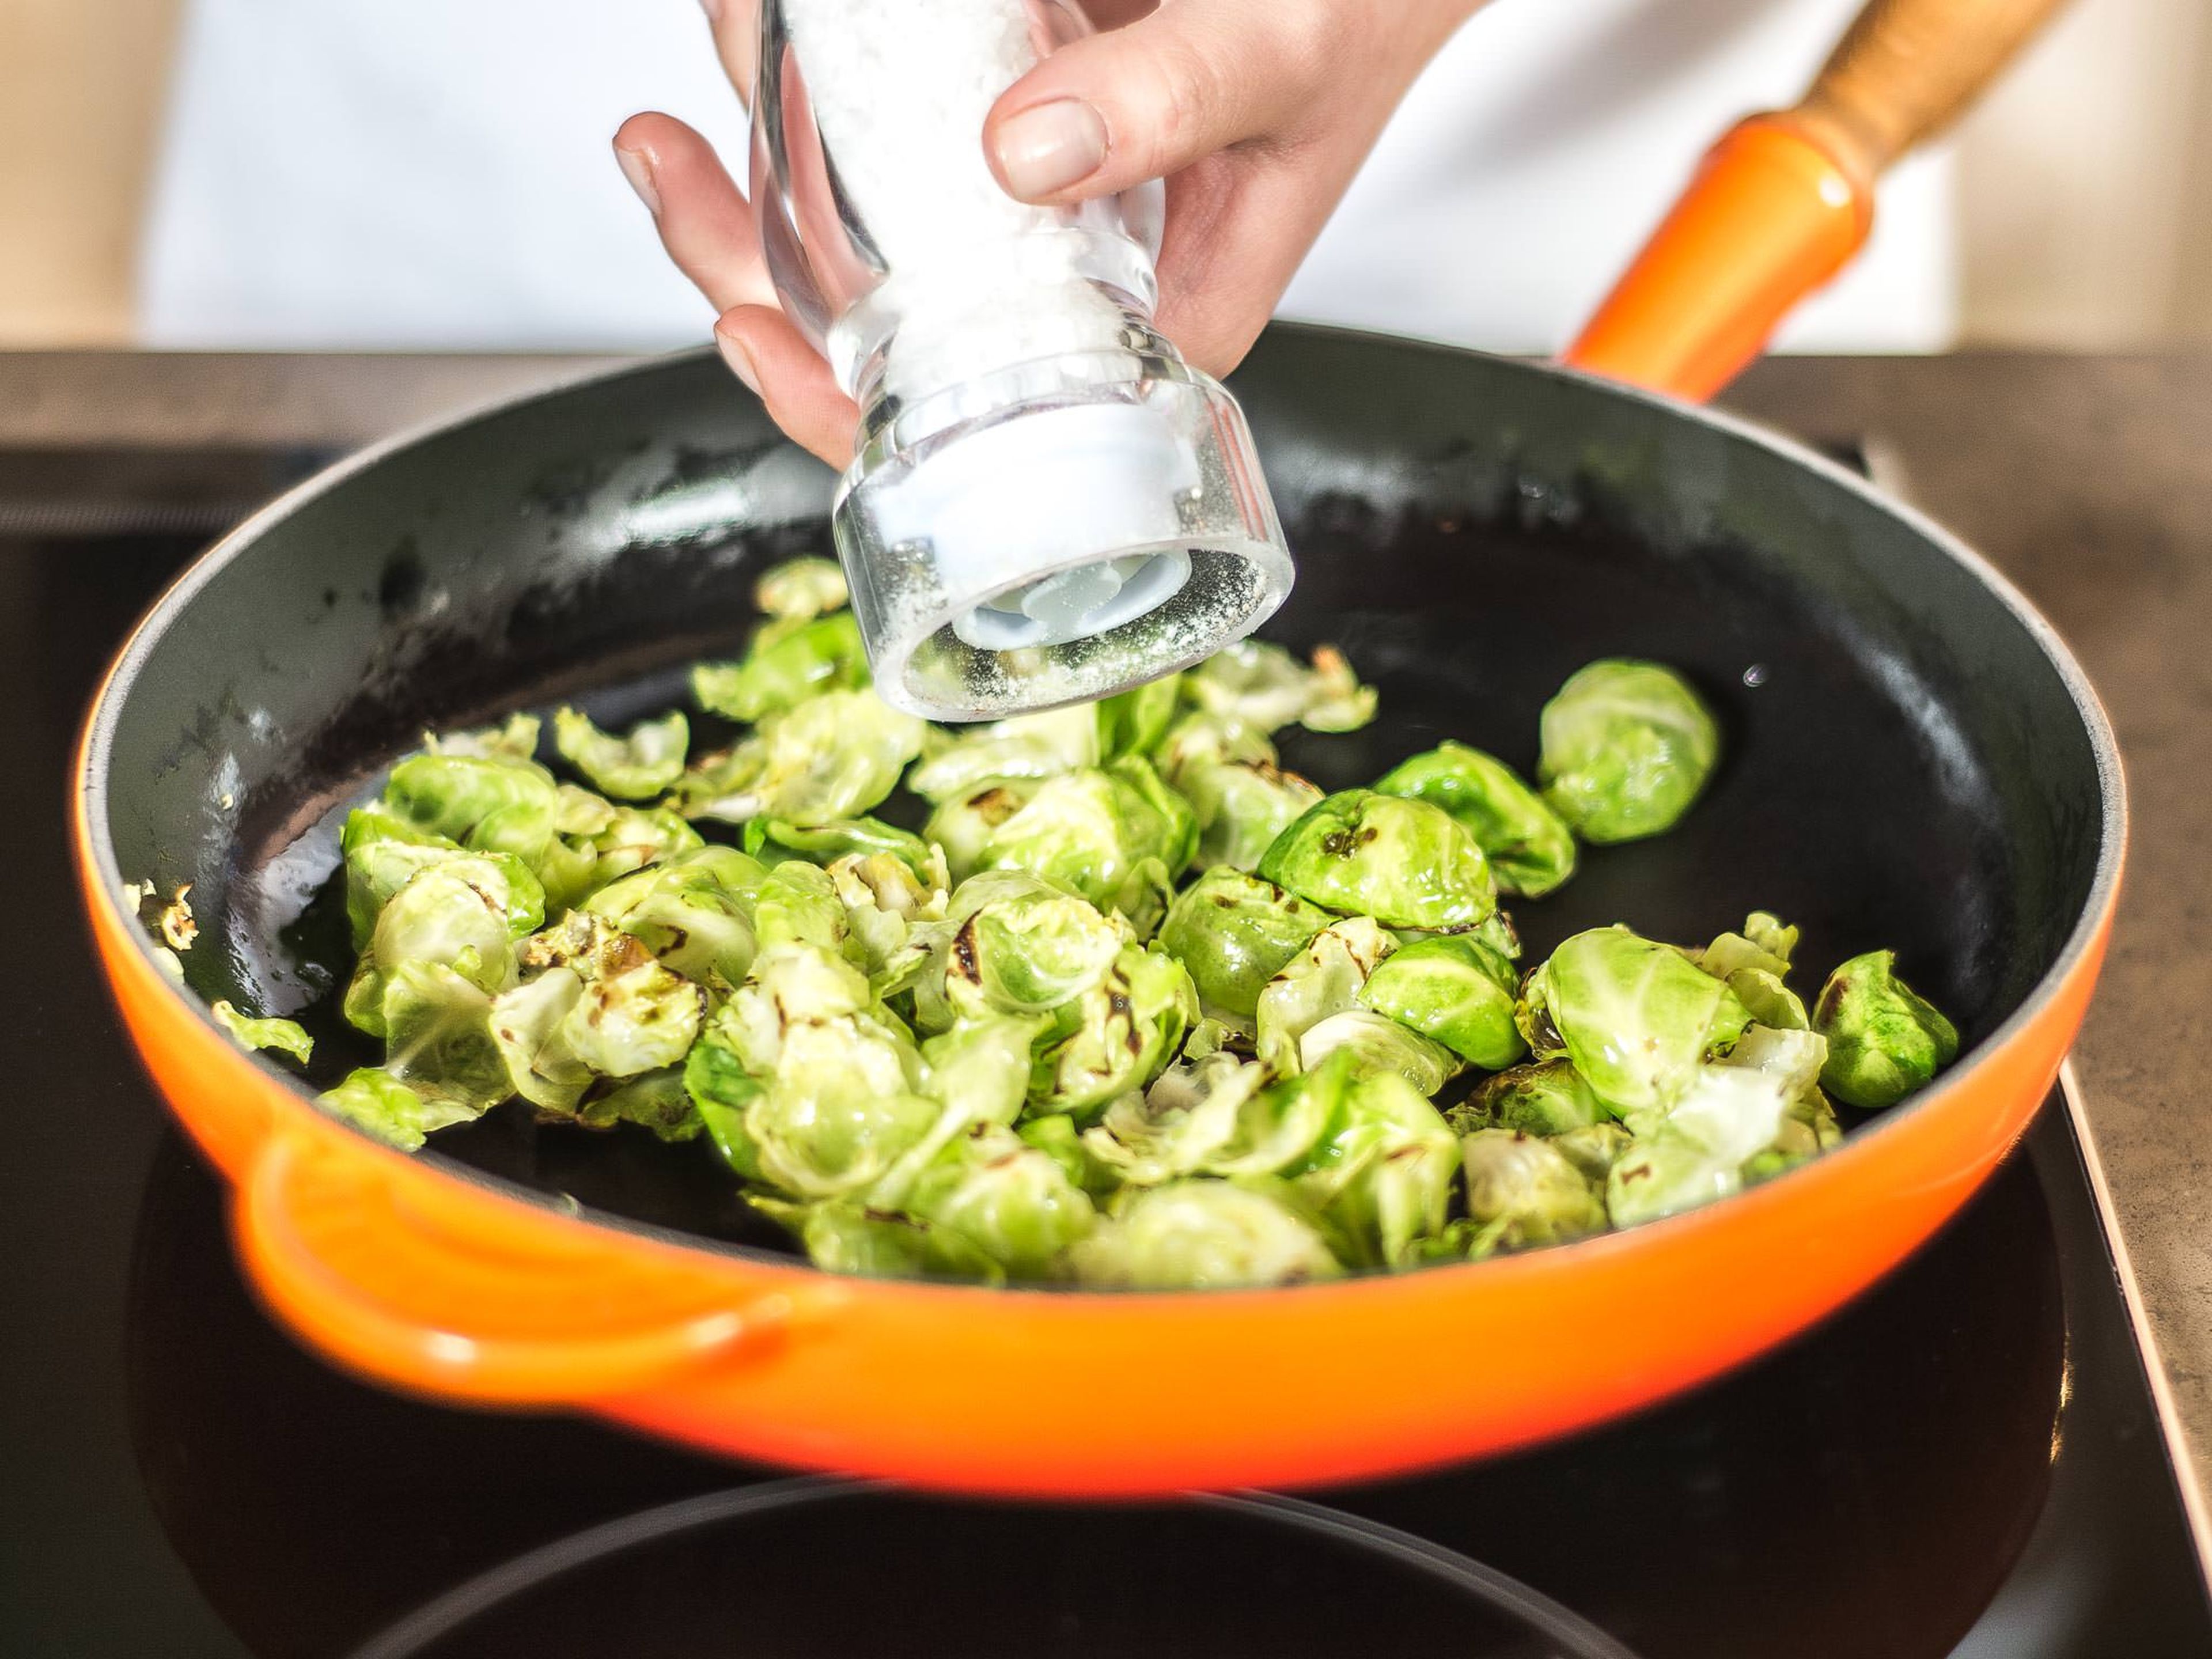 Sear the Brussels sprouts leaves in a hot frying pan with some vegetable oil; season with salt and pepper and a pinch of nutmeg.